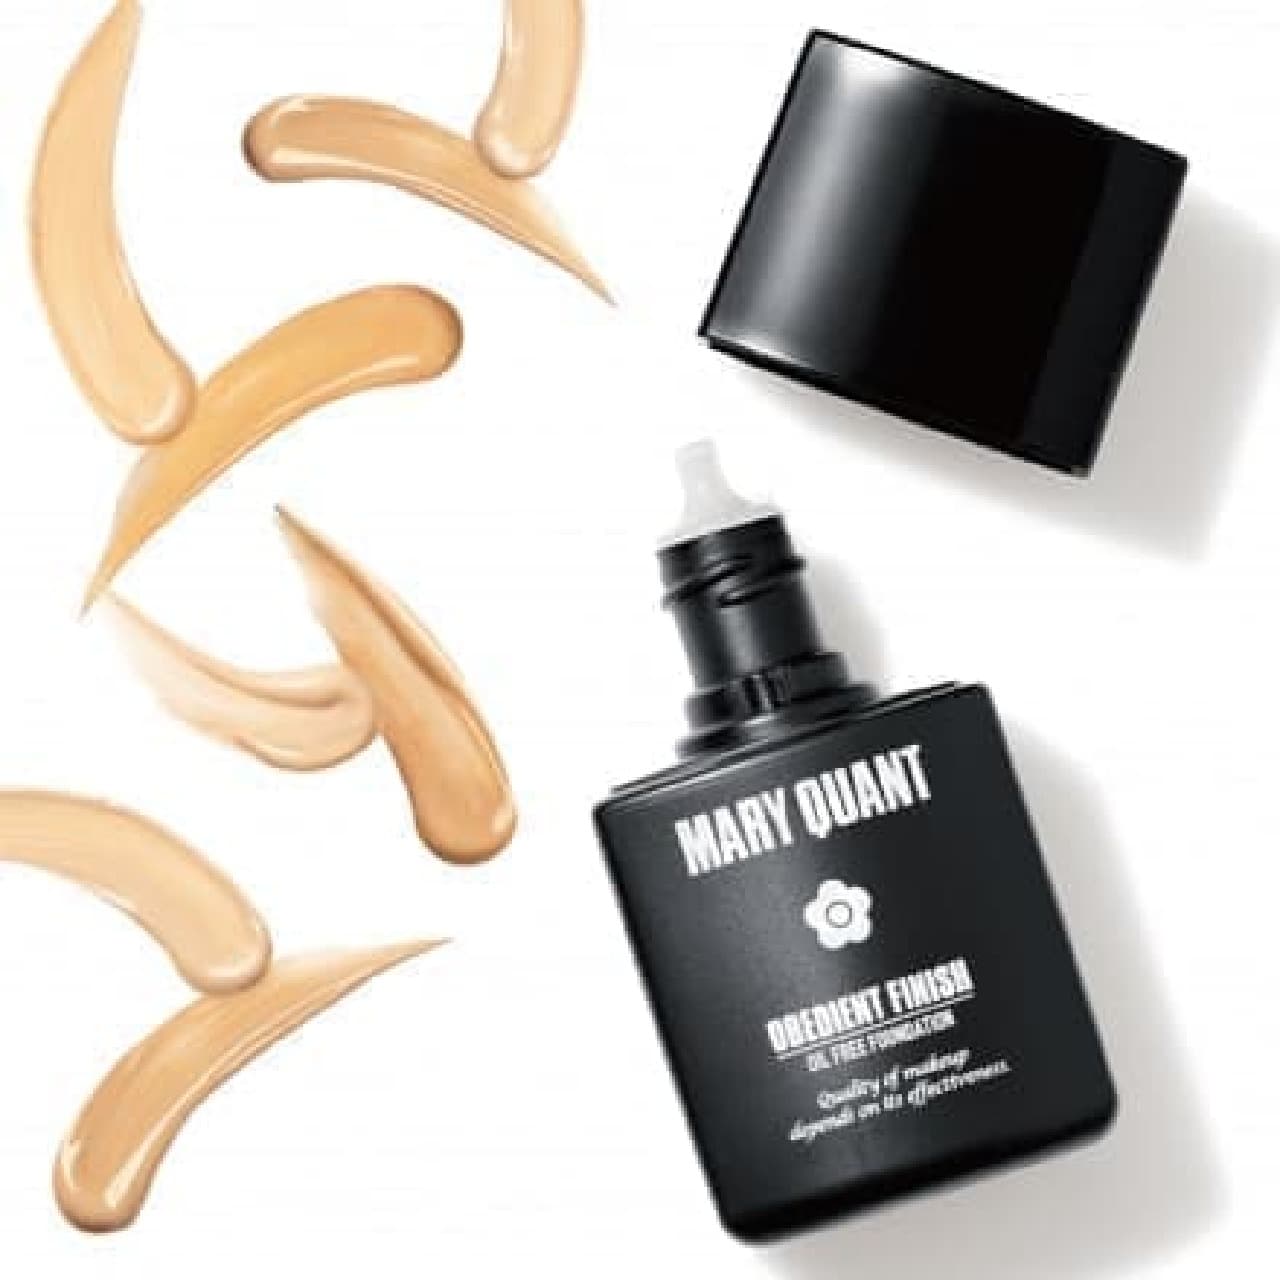 Mary Quant "Obby Dient Finish"